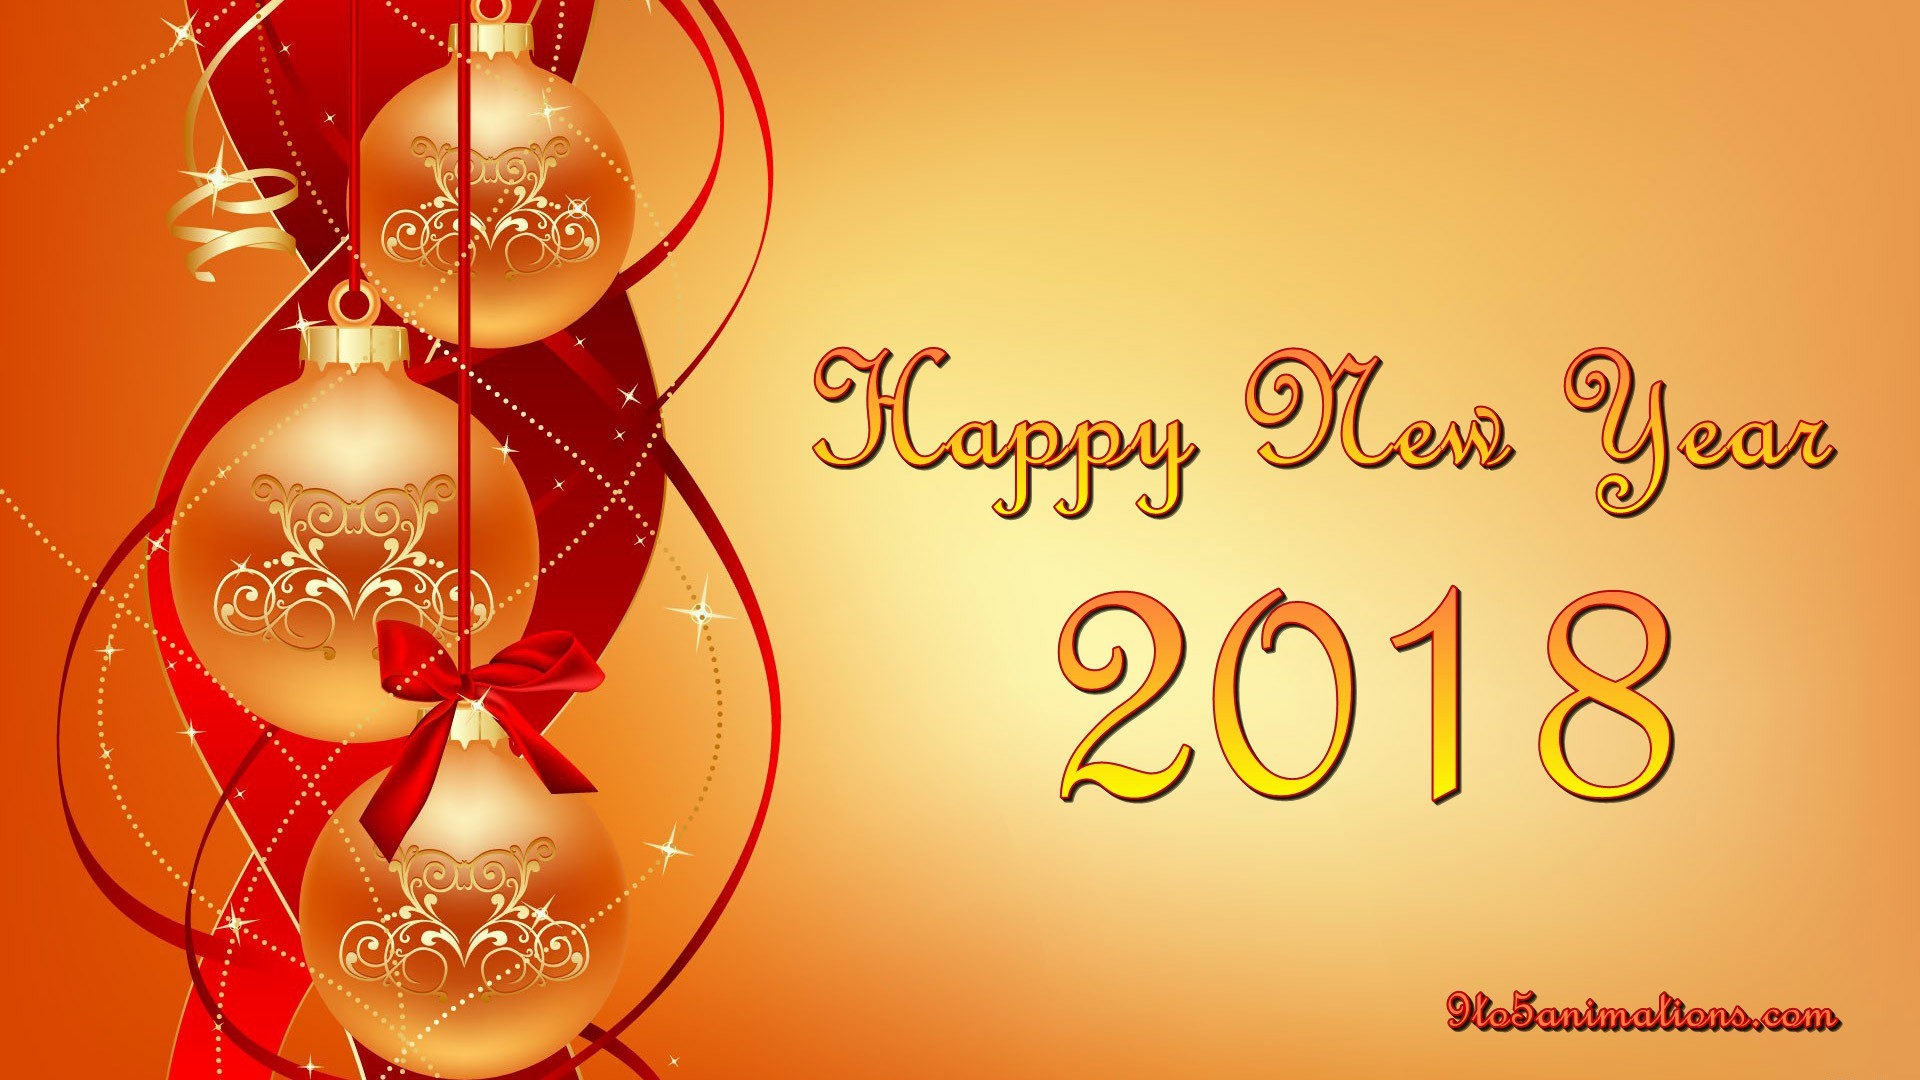 1920x1080 New Year Red Theme Wallpapers HD 9To5AnimationsCom 